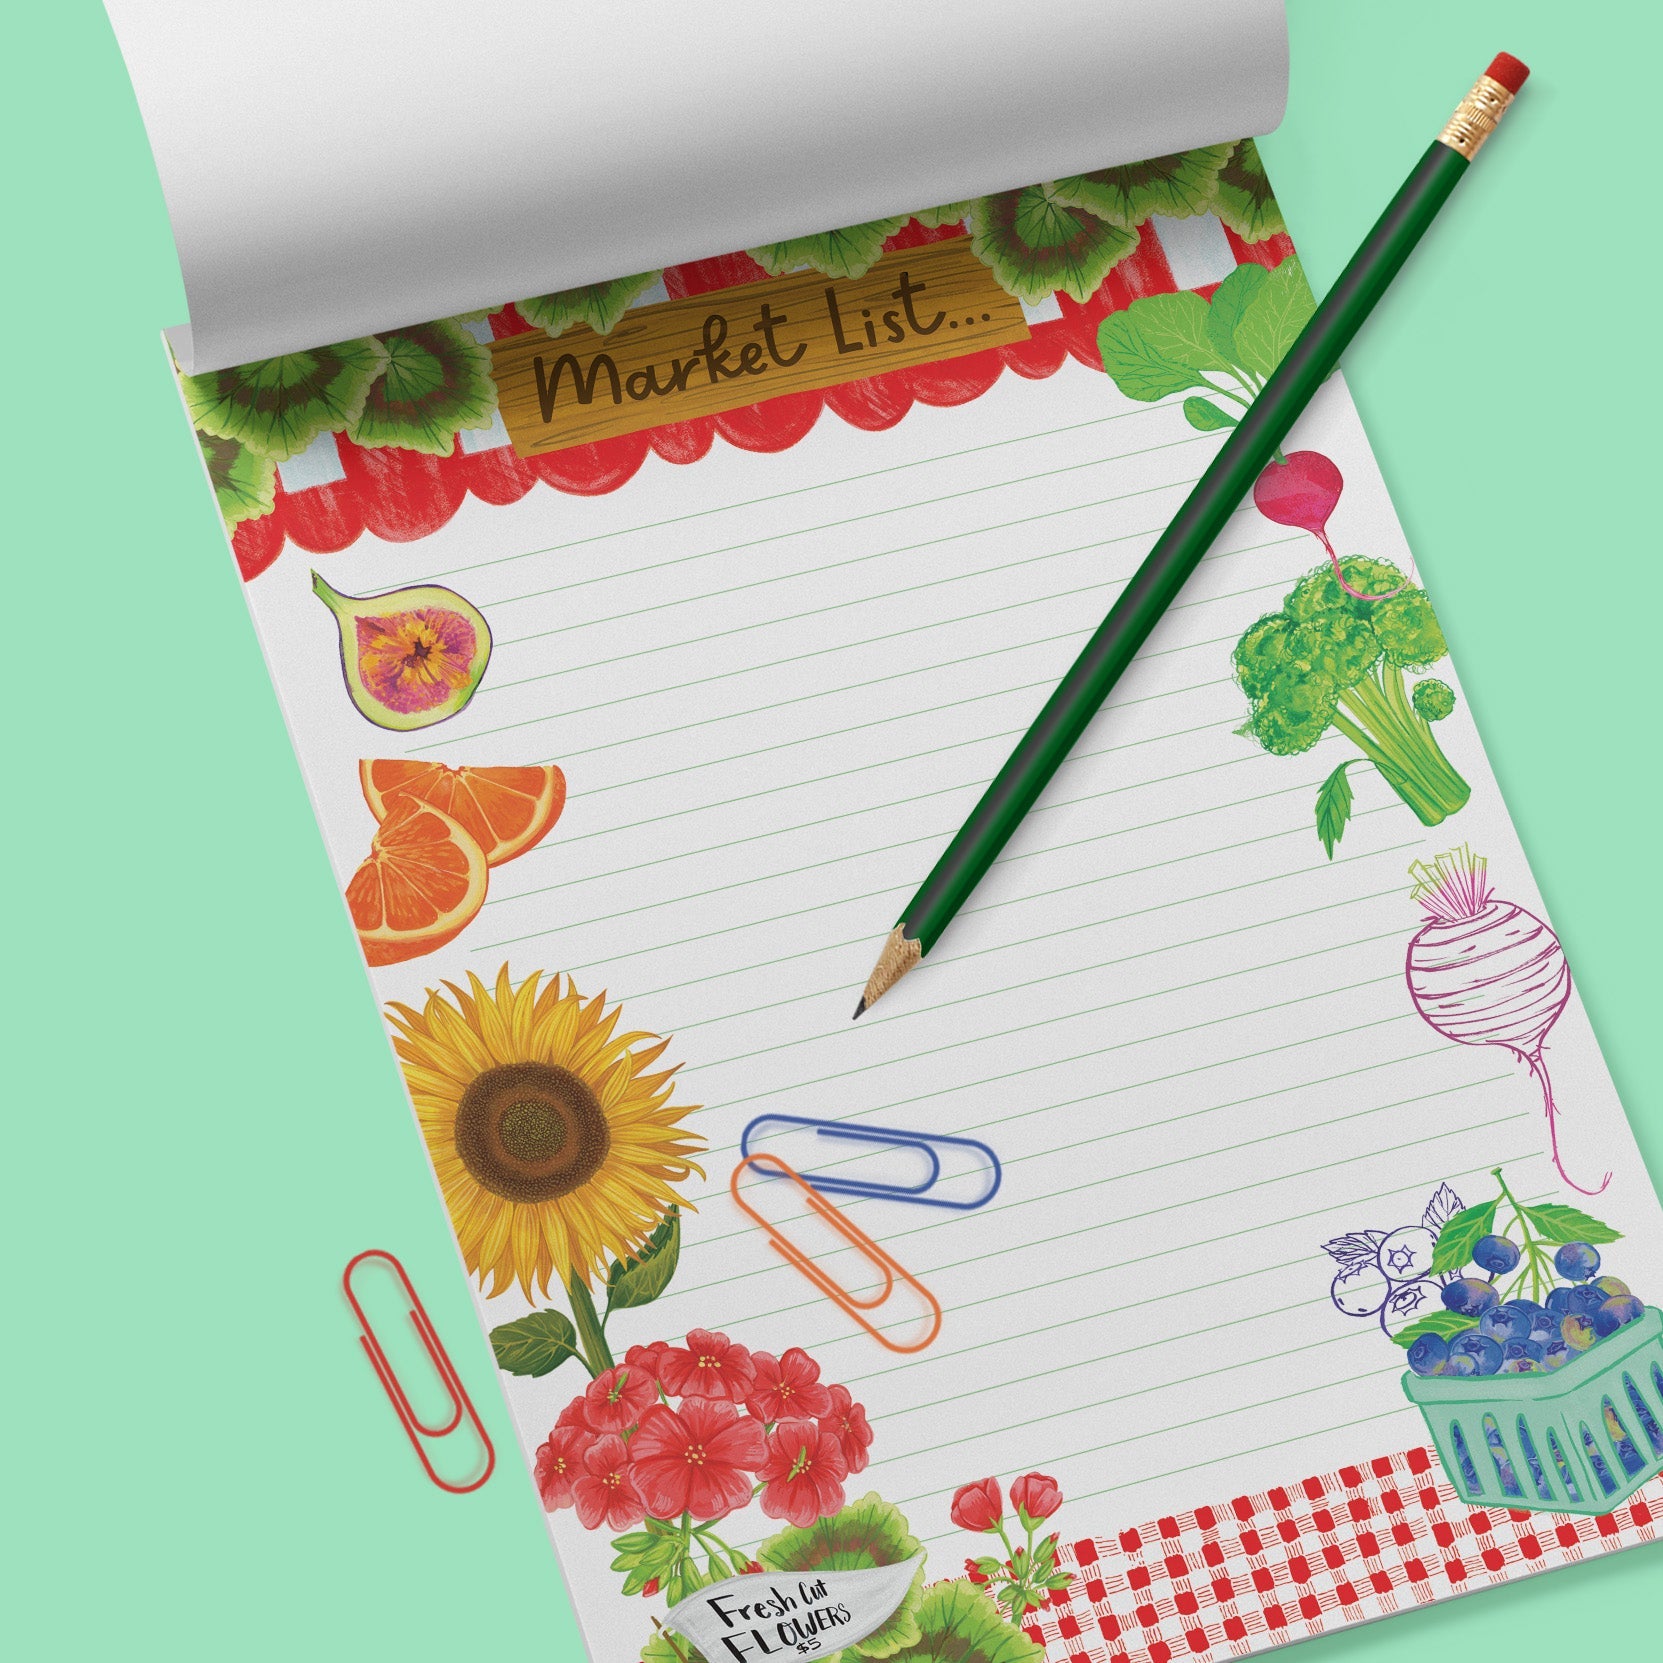 Mint green background with a Market List Notepad with colorful fruit and vegetable illustrations. Green pencil and 3 colorful paperclips. 